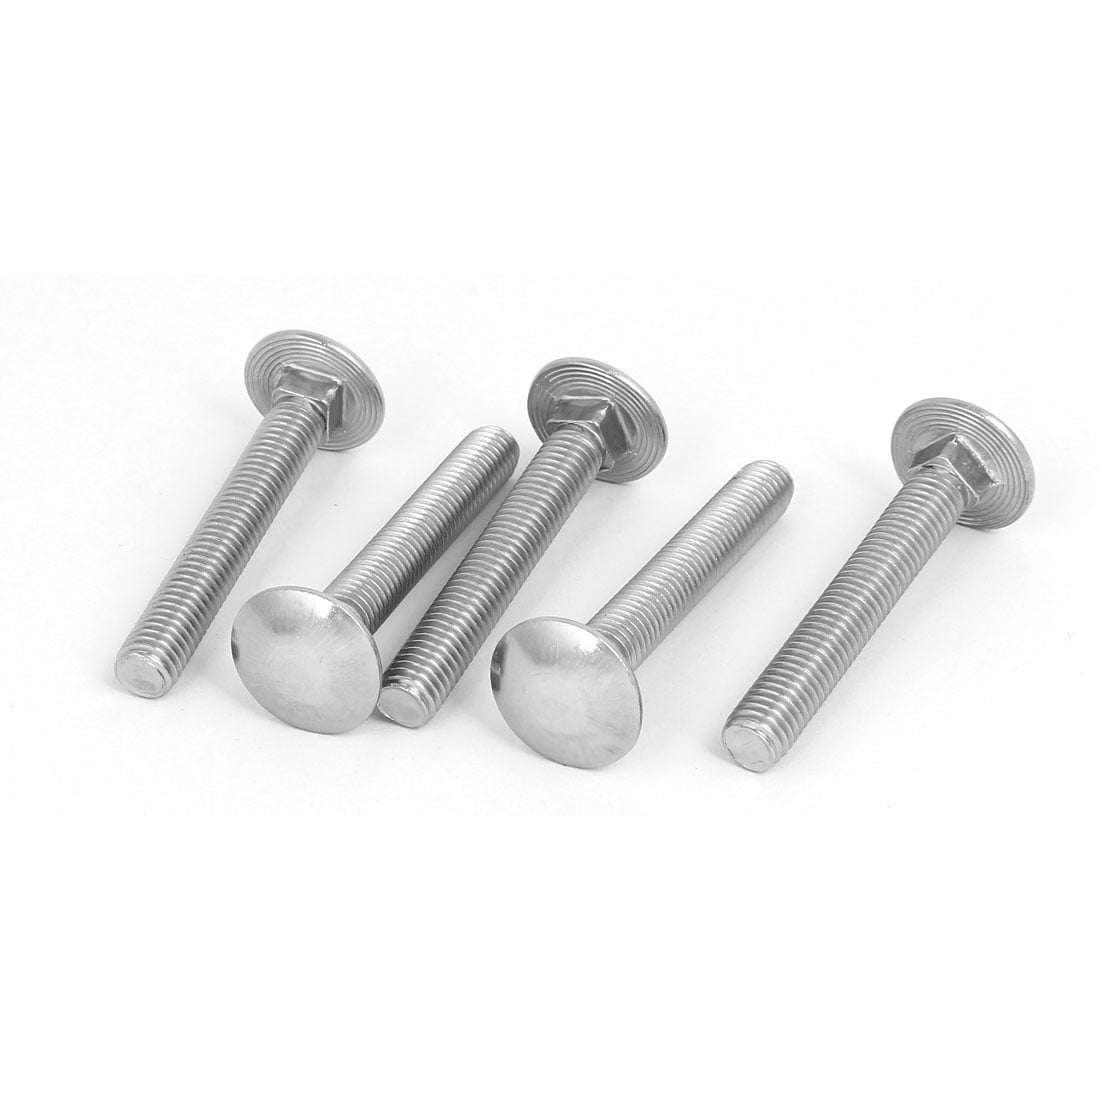 Carriage Bolts Neck Carriage Bolt Stainless Steel M6x35mm 5pcs